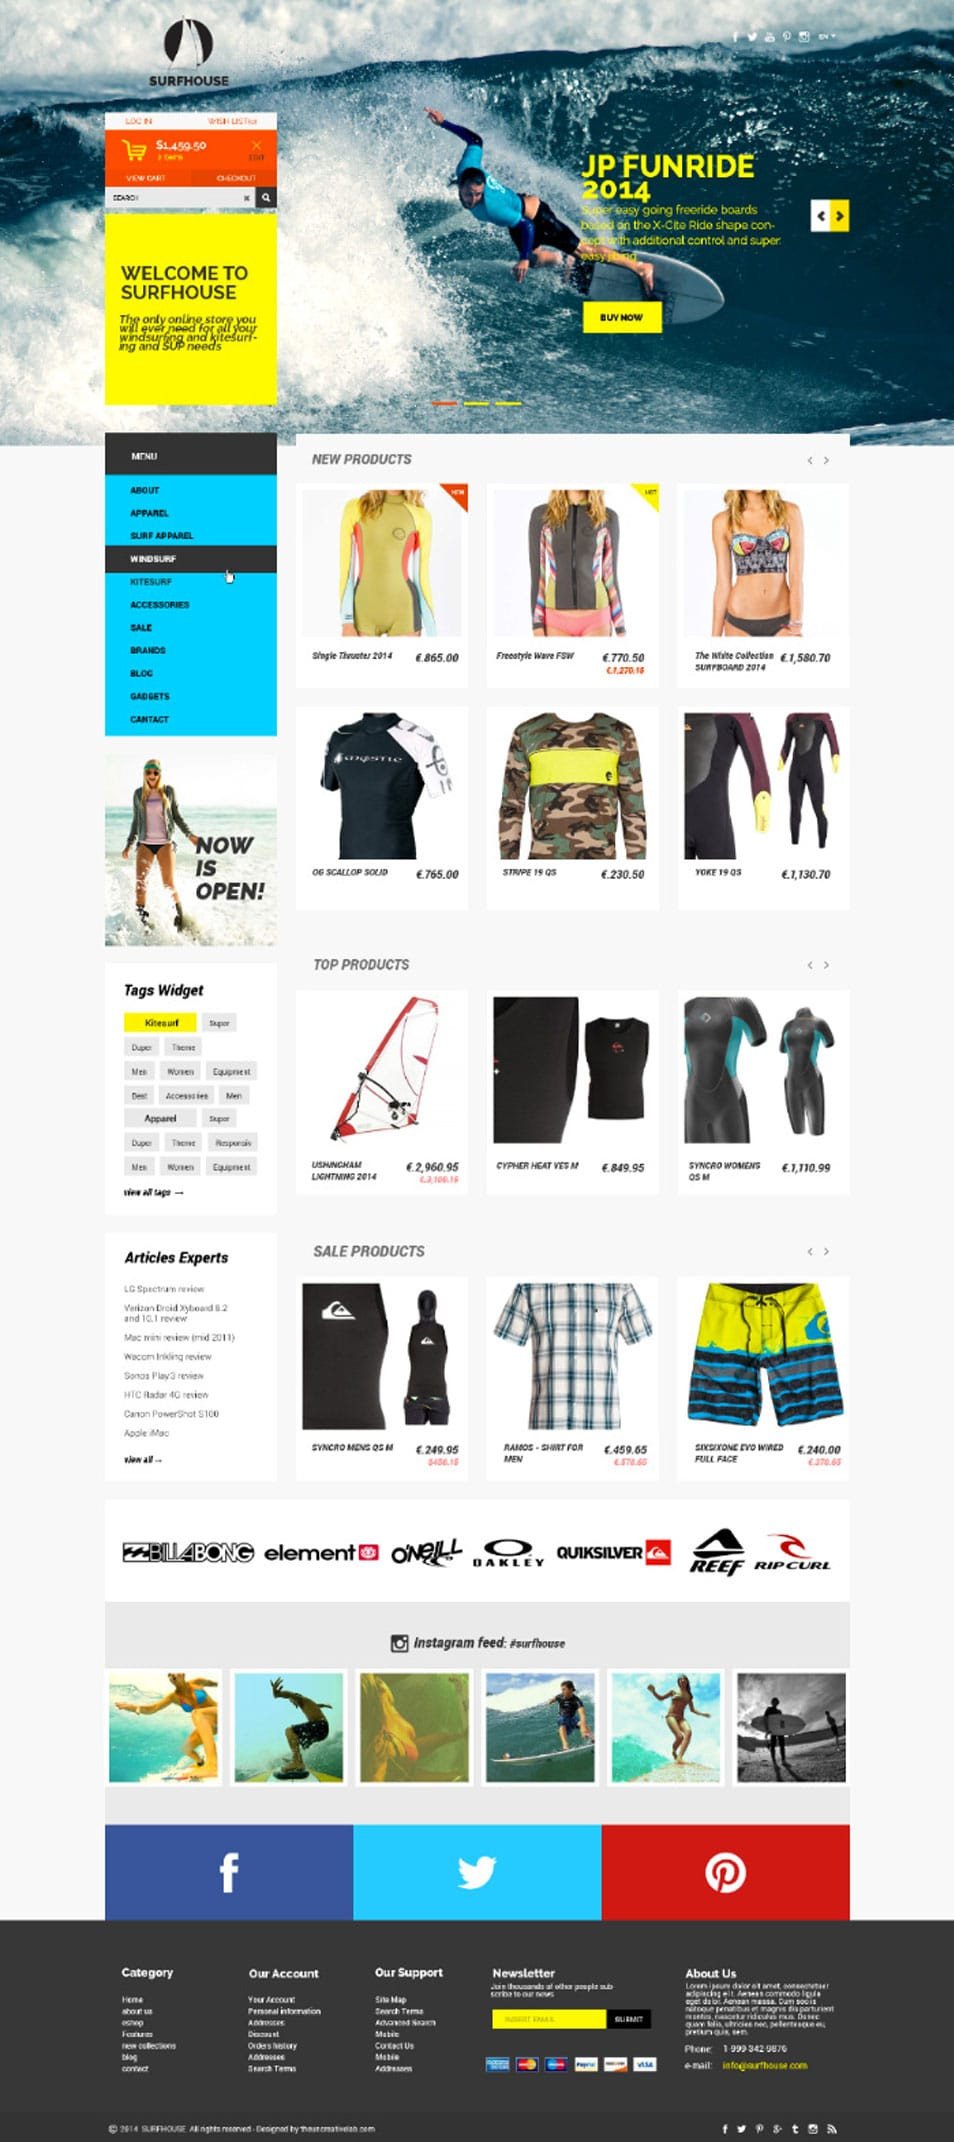 Free Ecommerce Websites Templates Latest Free Web Page Templates Psd Css Author